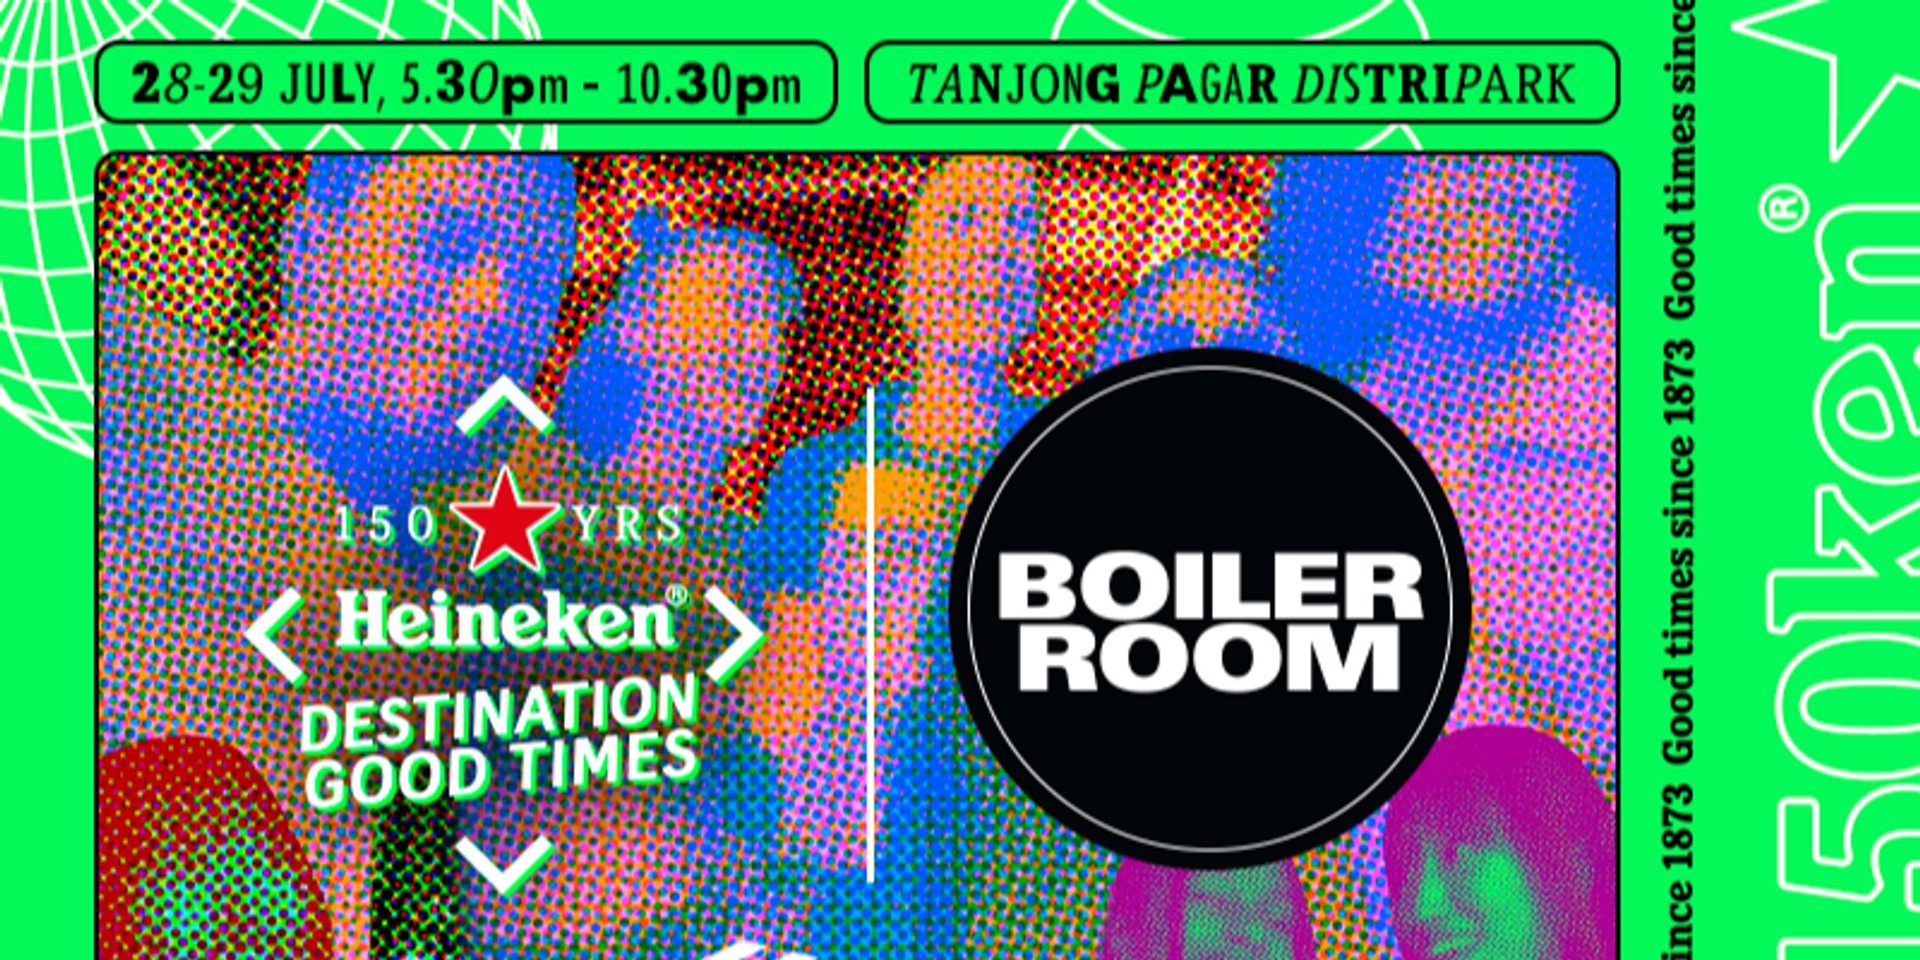 Heineken's Destination Good Times to host first-ever 'Boiler Room' event in Singapore — Alex Kassian, Kamma & Masalo, Dean Chew, Sivanesh, and more on the lineup